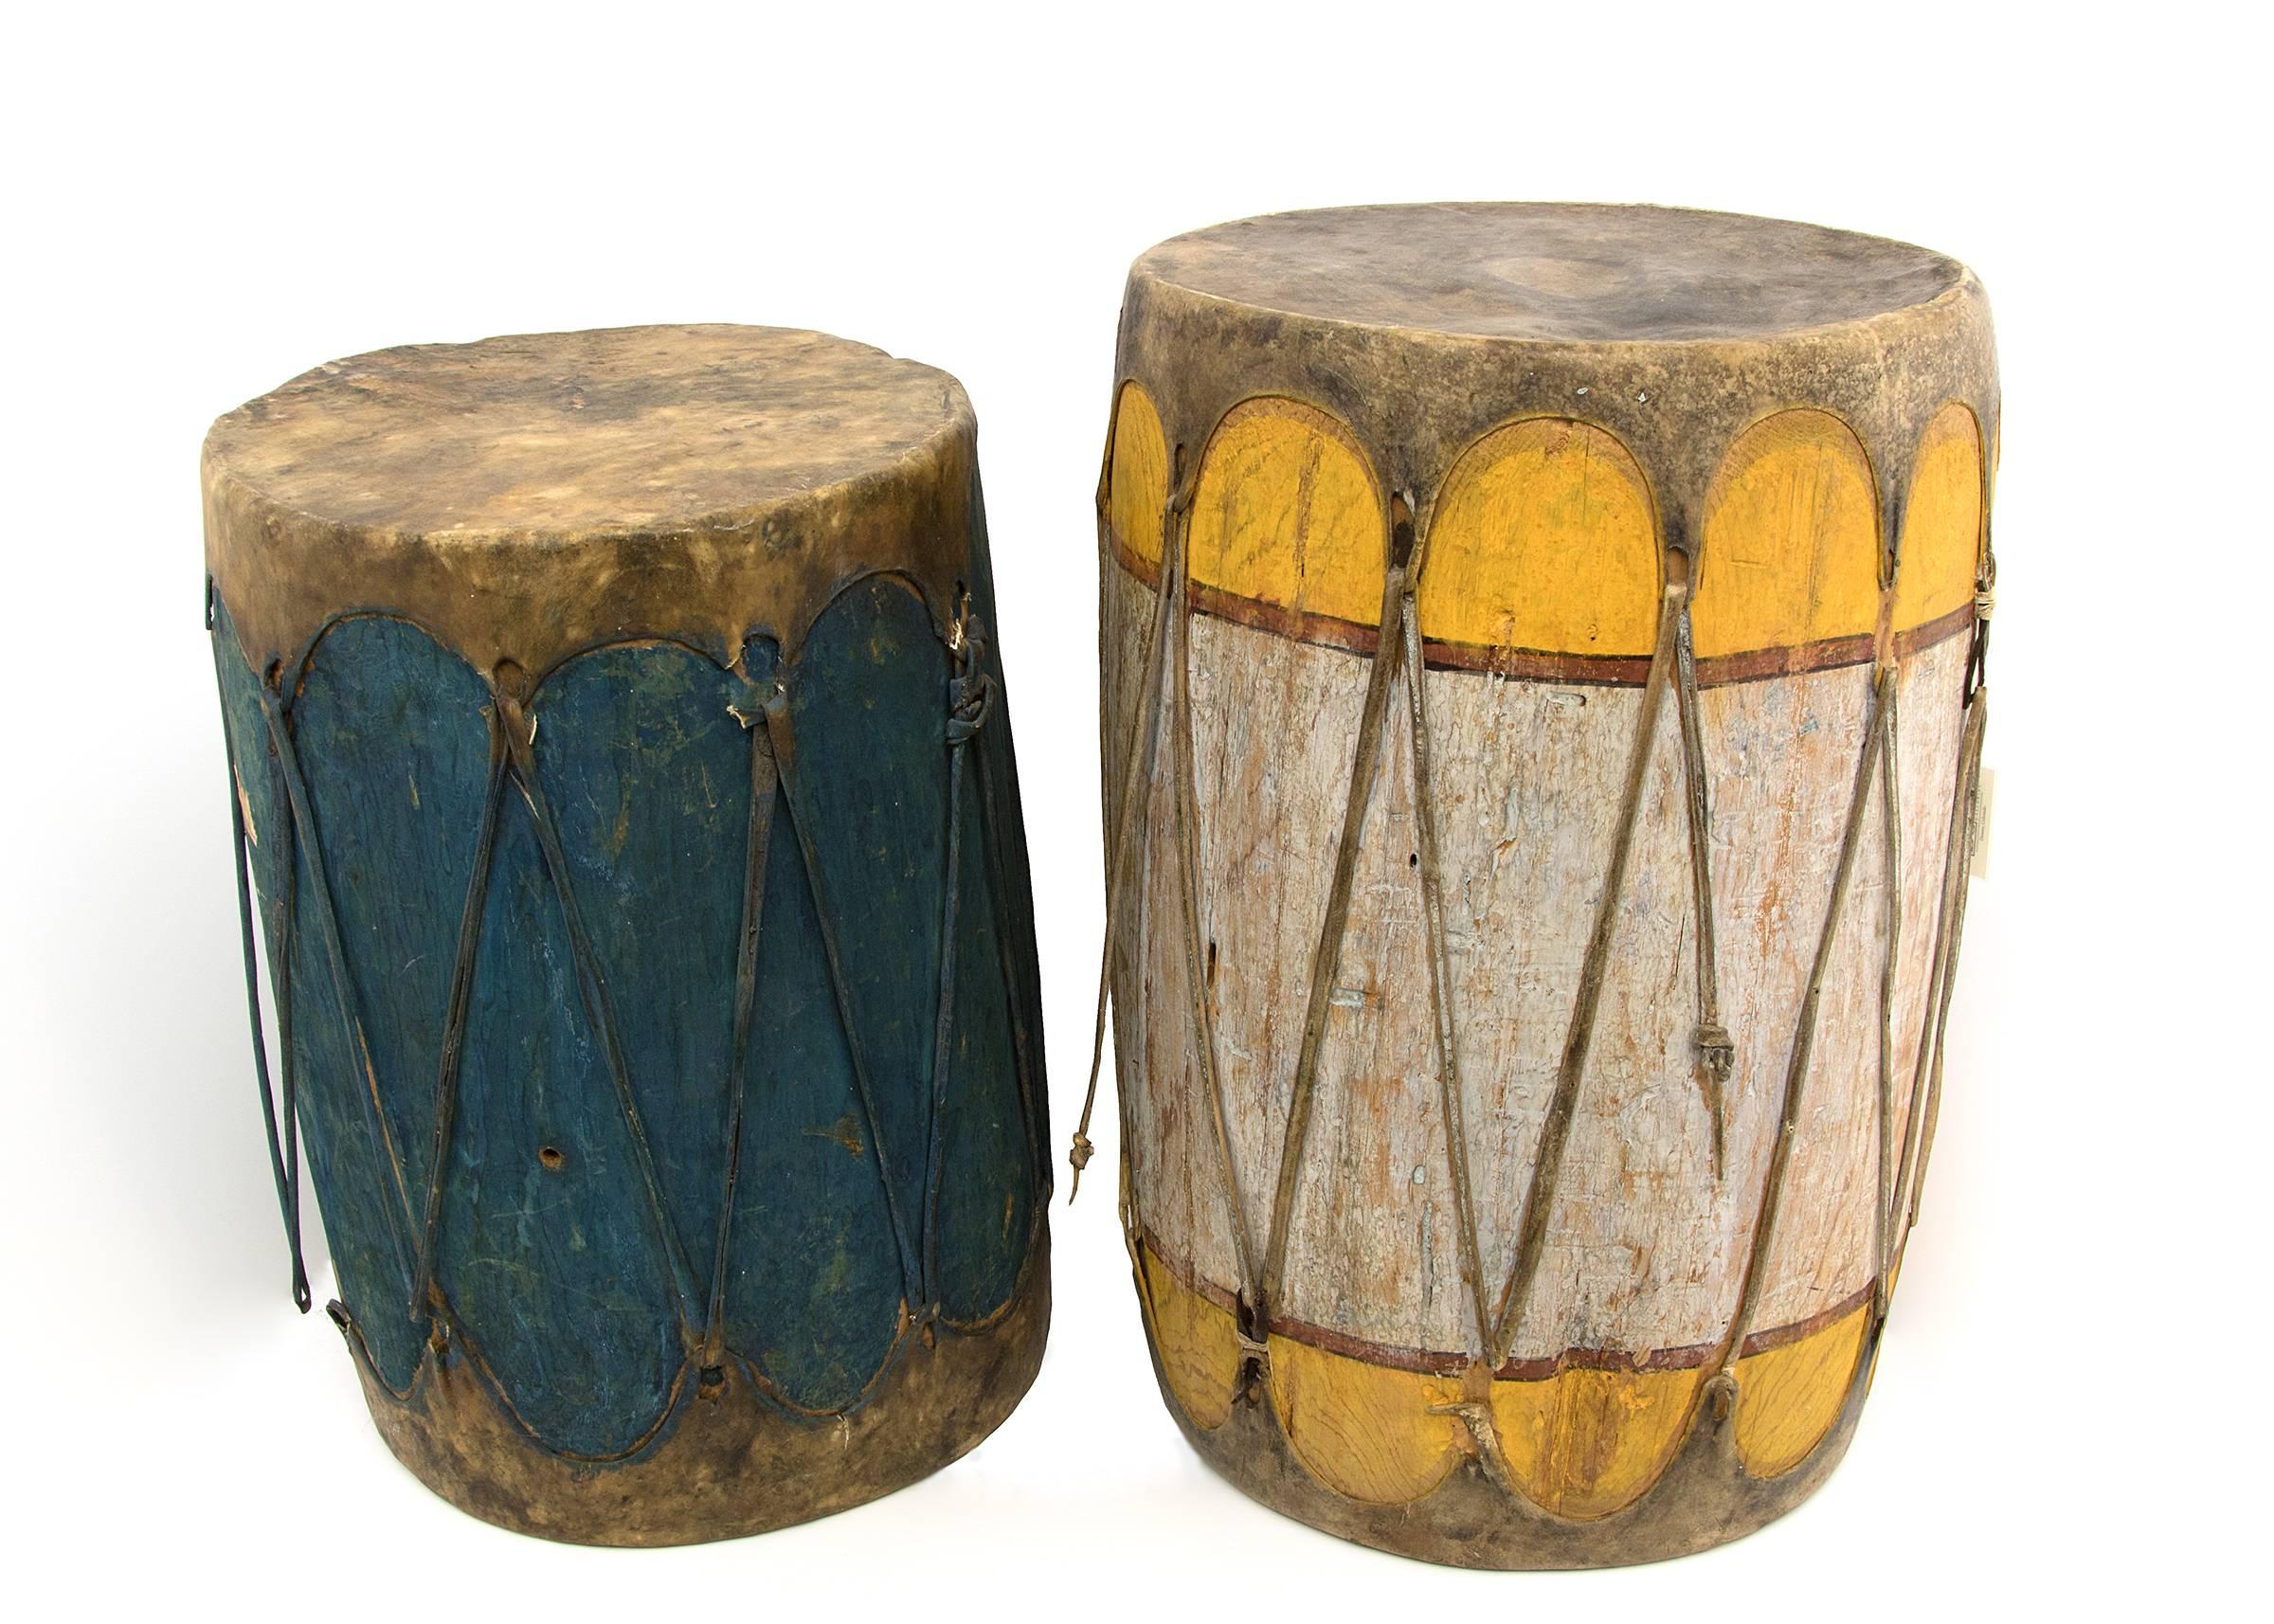 Two Pueblo drums from the early 20th century constructed of wood with stretched rawhide and vegetal paint.
Dimensions as displayed: 28 x 38 inches. Individual measurements: Left (blue): 24 H x 18 Di inches. Right (yellow): 28 H x 17 Di inches.
These